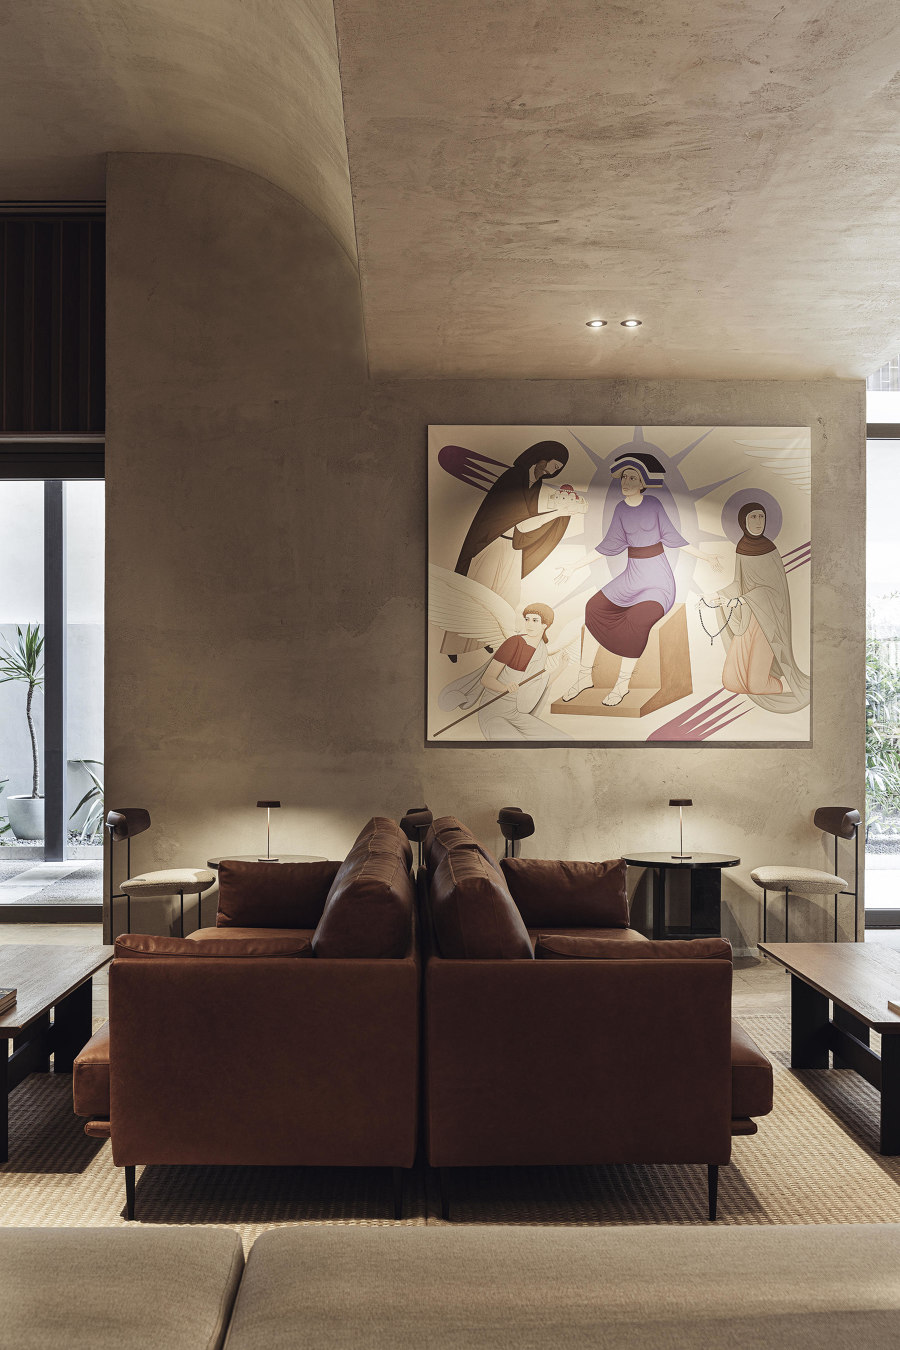 Newly opened hotel interiors that reflect their environment | Aktuelles